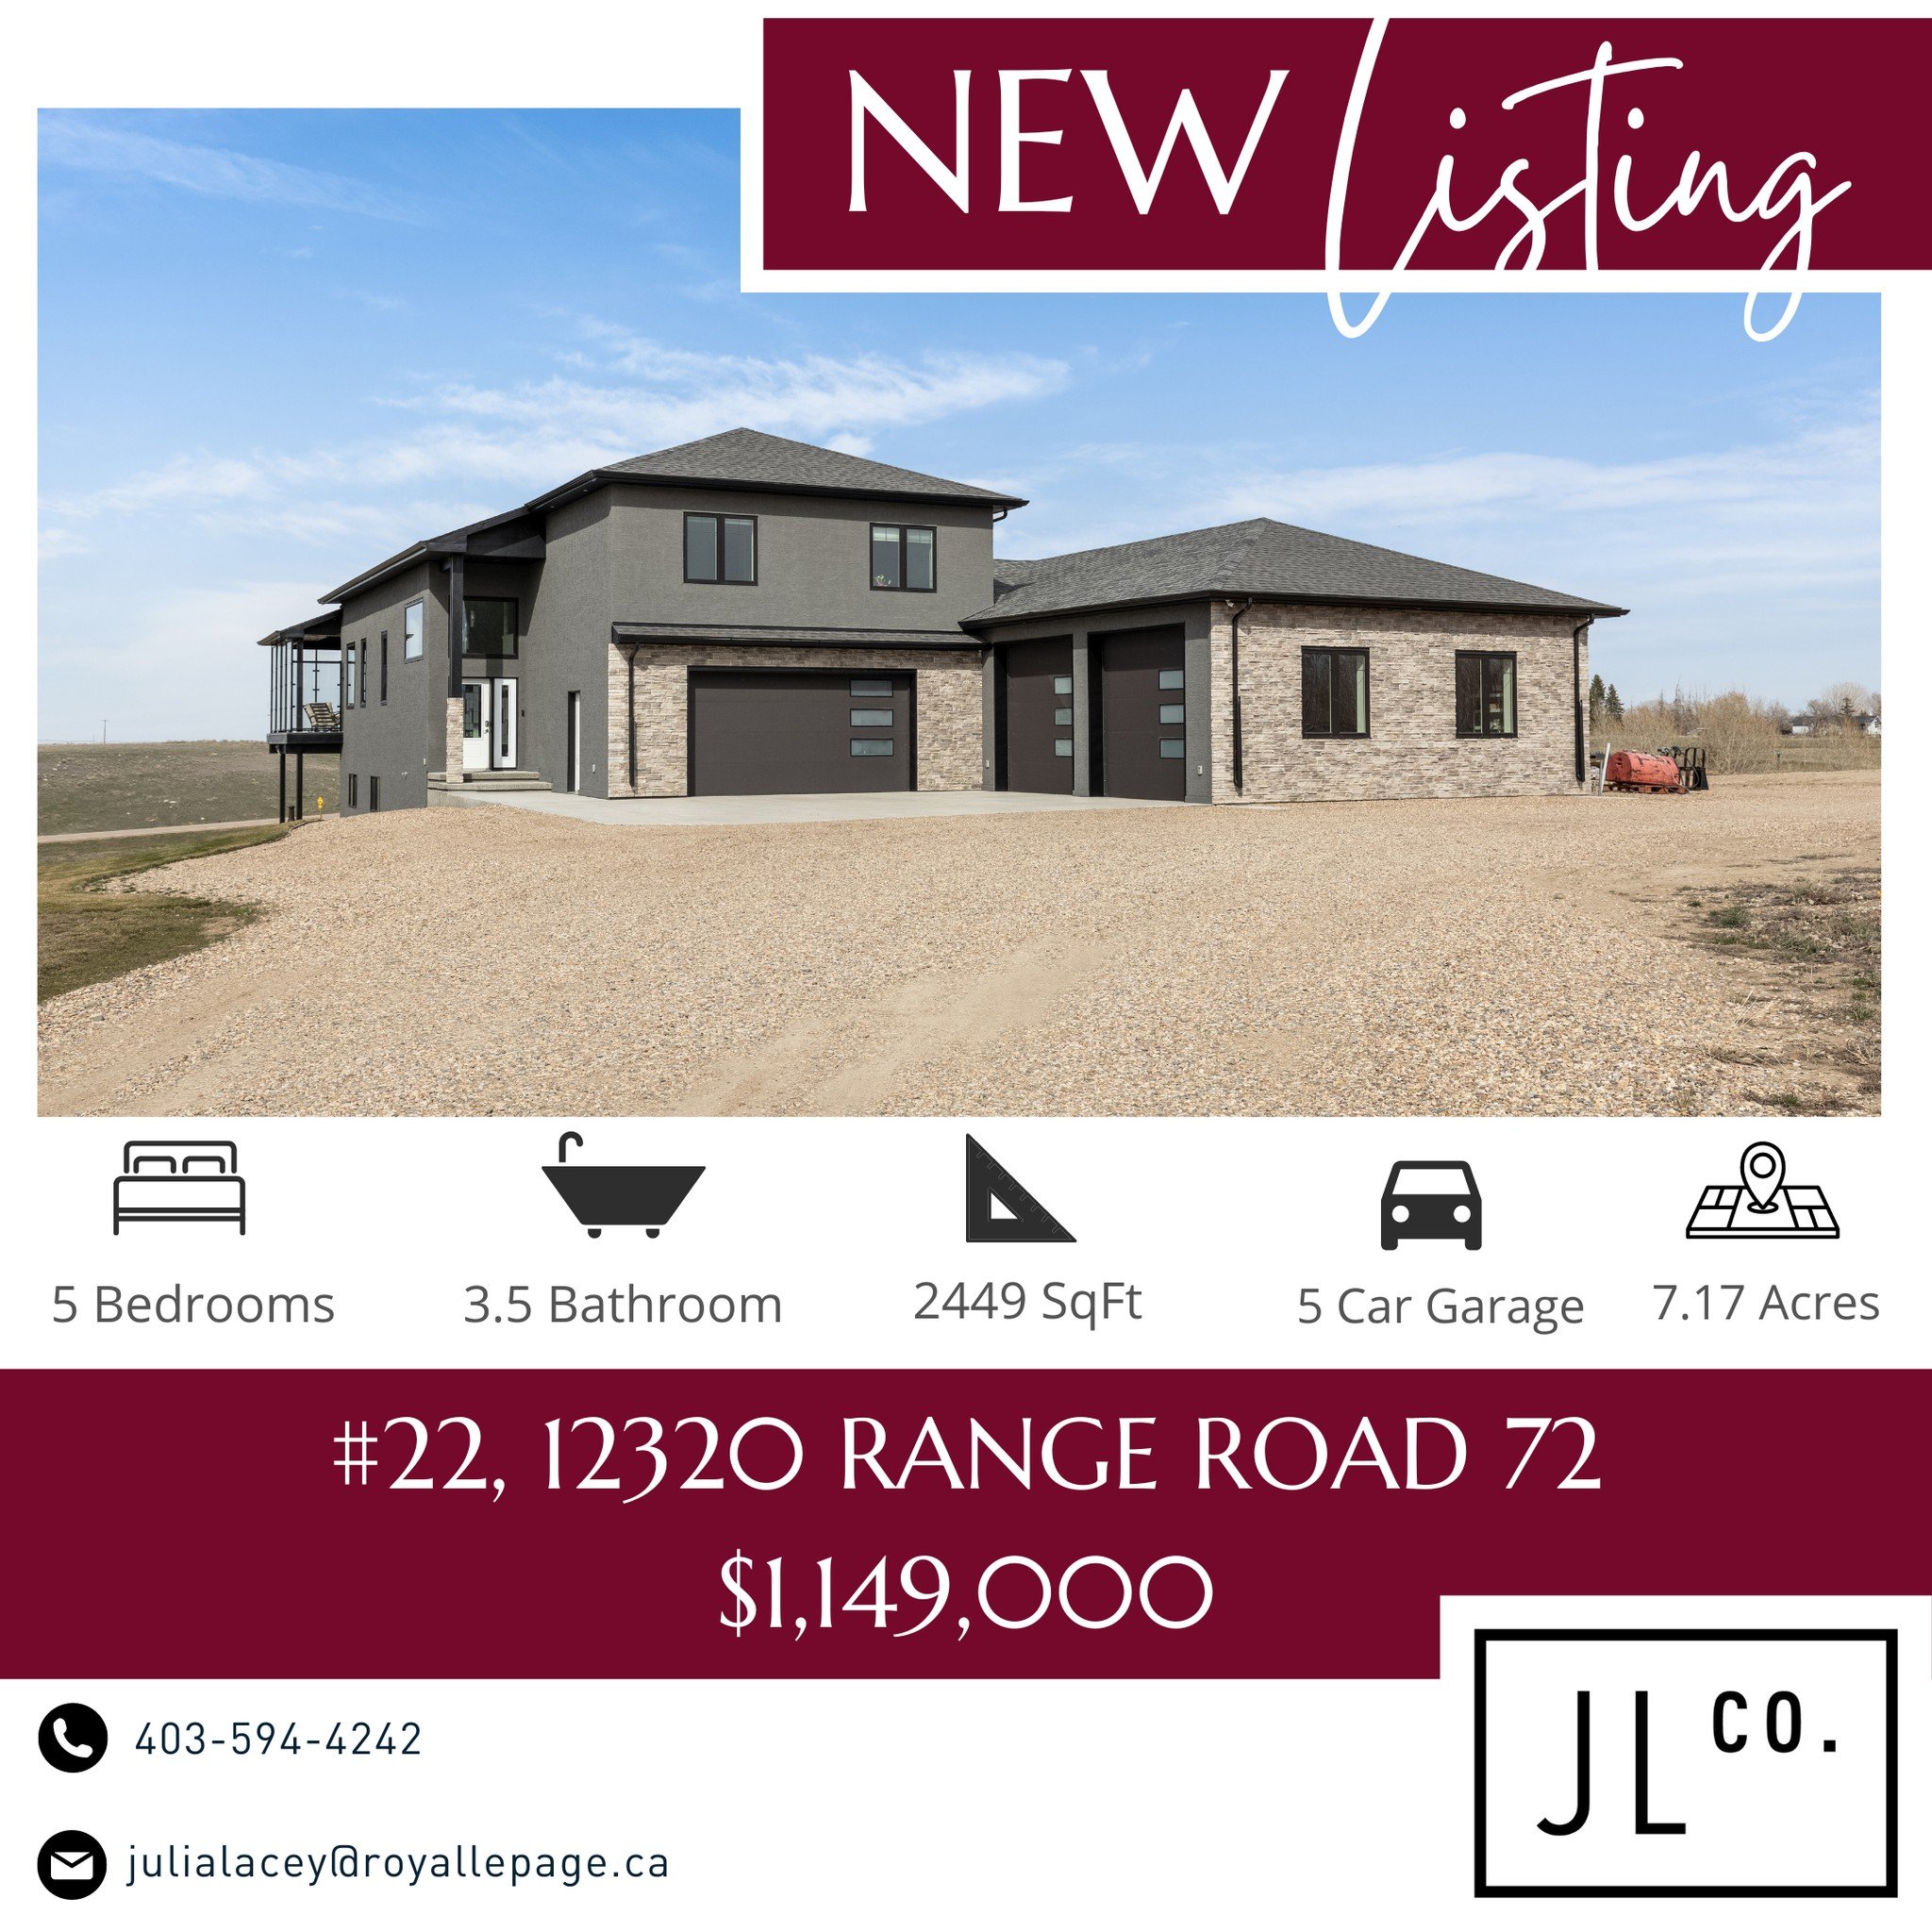 🌟 New Listing Alert! 🌟

Escape to tranquility just minutes from Medicine Hat in the serene West Ridge Country Estates. This stunning 2449 SqFt Modified Bi-level sits on 7.17 acres of pure bliss!

🛌 5 Bedrooms
🛁 3.5 Bathrooms
🚗 Massive 2392 SqFt,